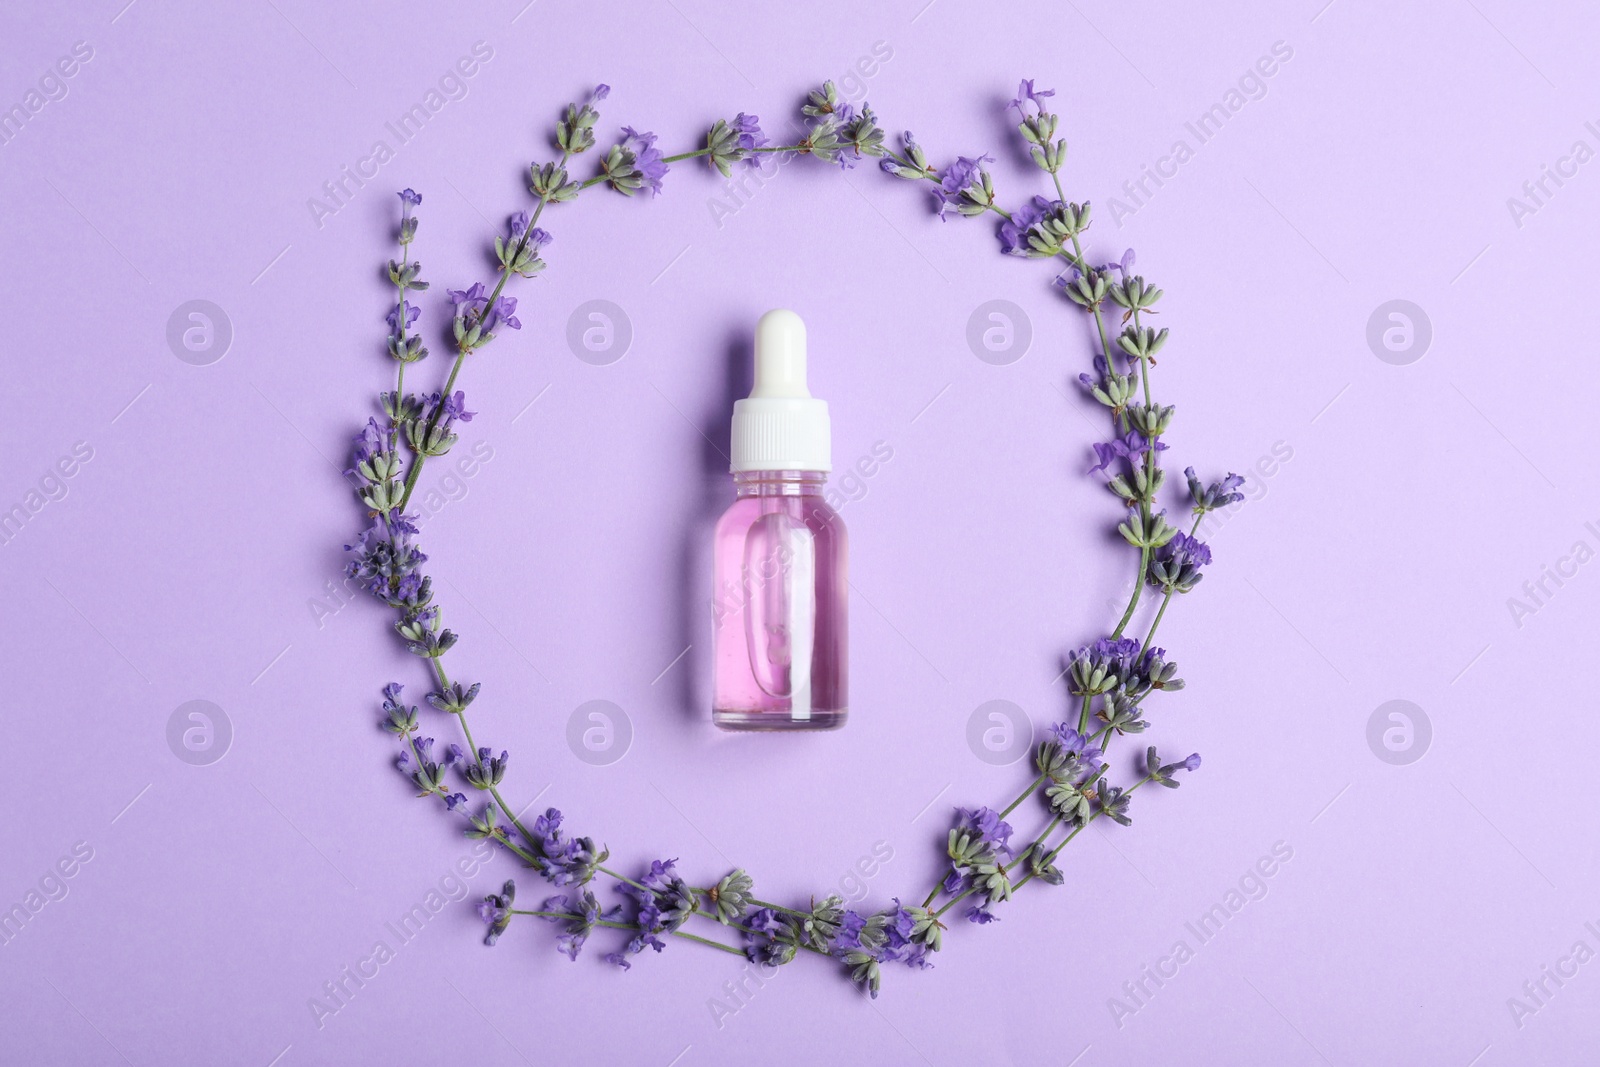 Photo of Bottle of essential oil and lavender flowers on lilac background, flat lay